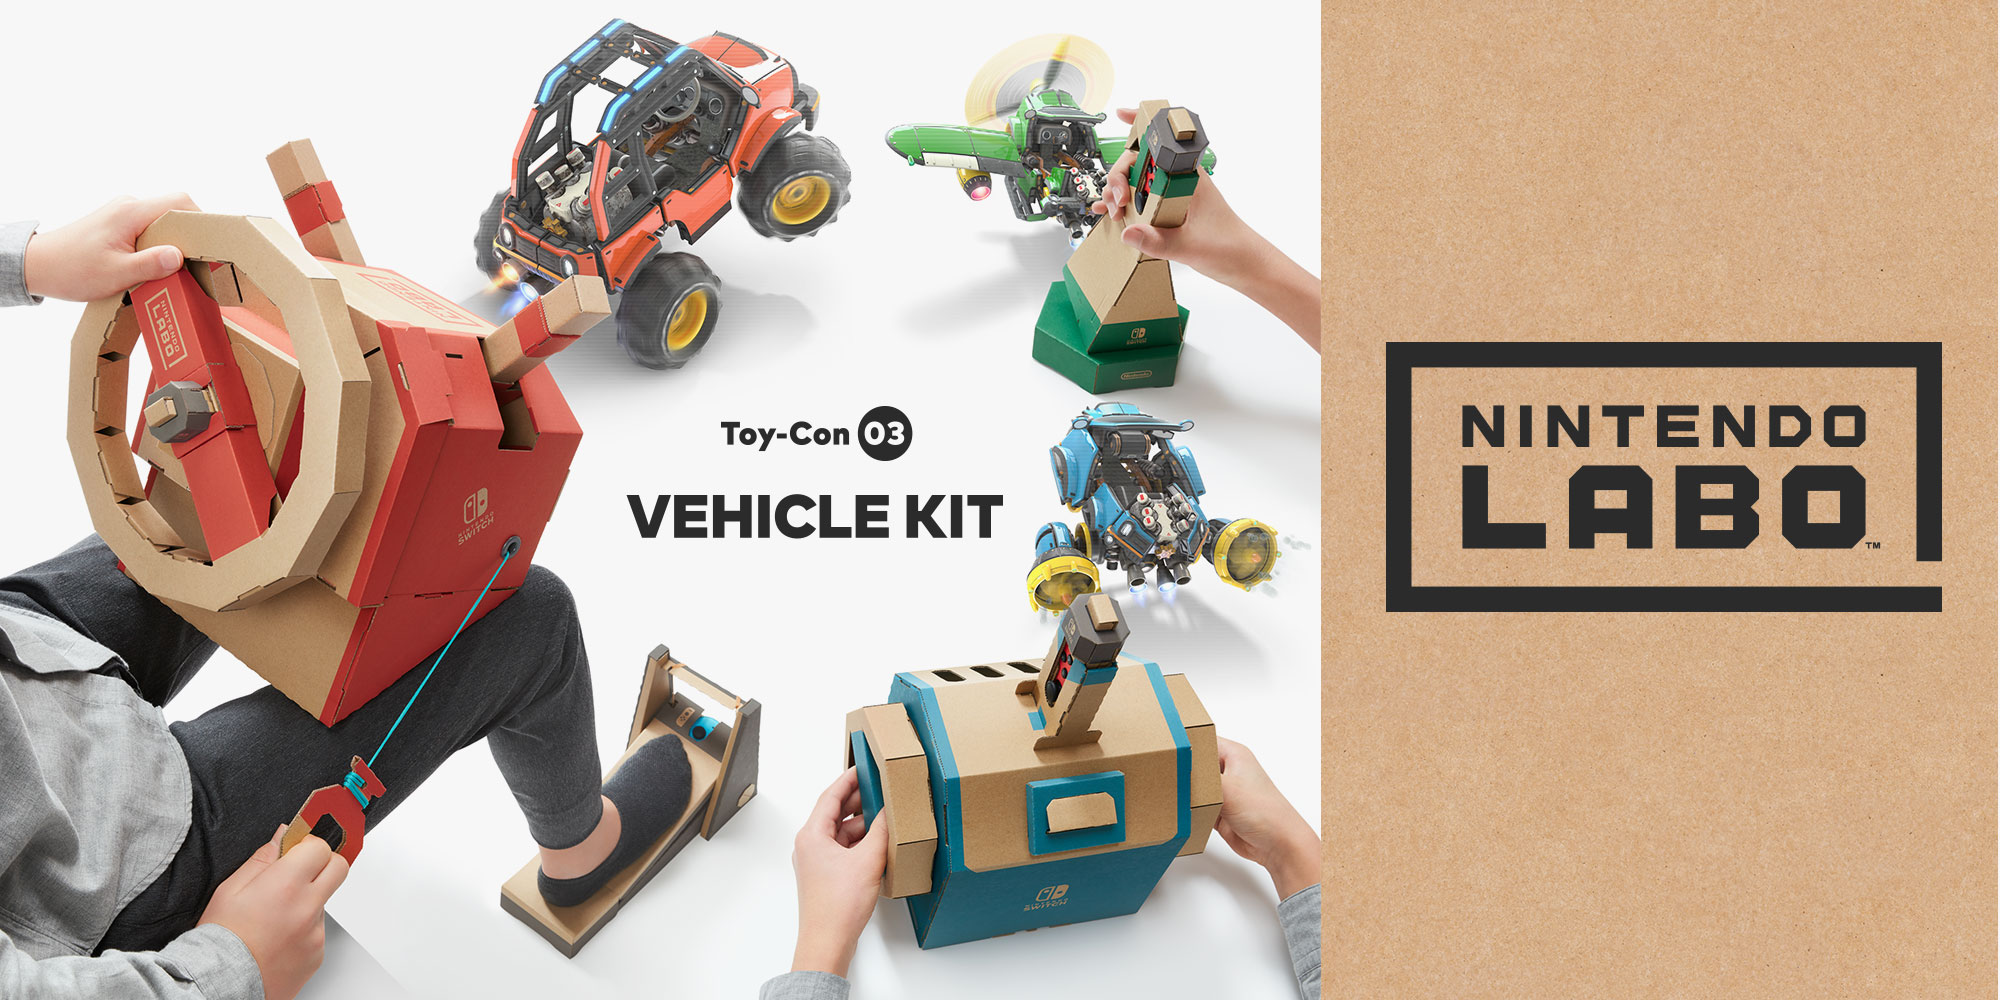 Regnfuld Neuropati revidere Drive, dive and fly with the new Nintendo Labo: Vehicle Kit for Nintendo  Switch | News | Nintendo